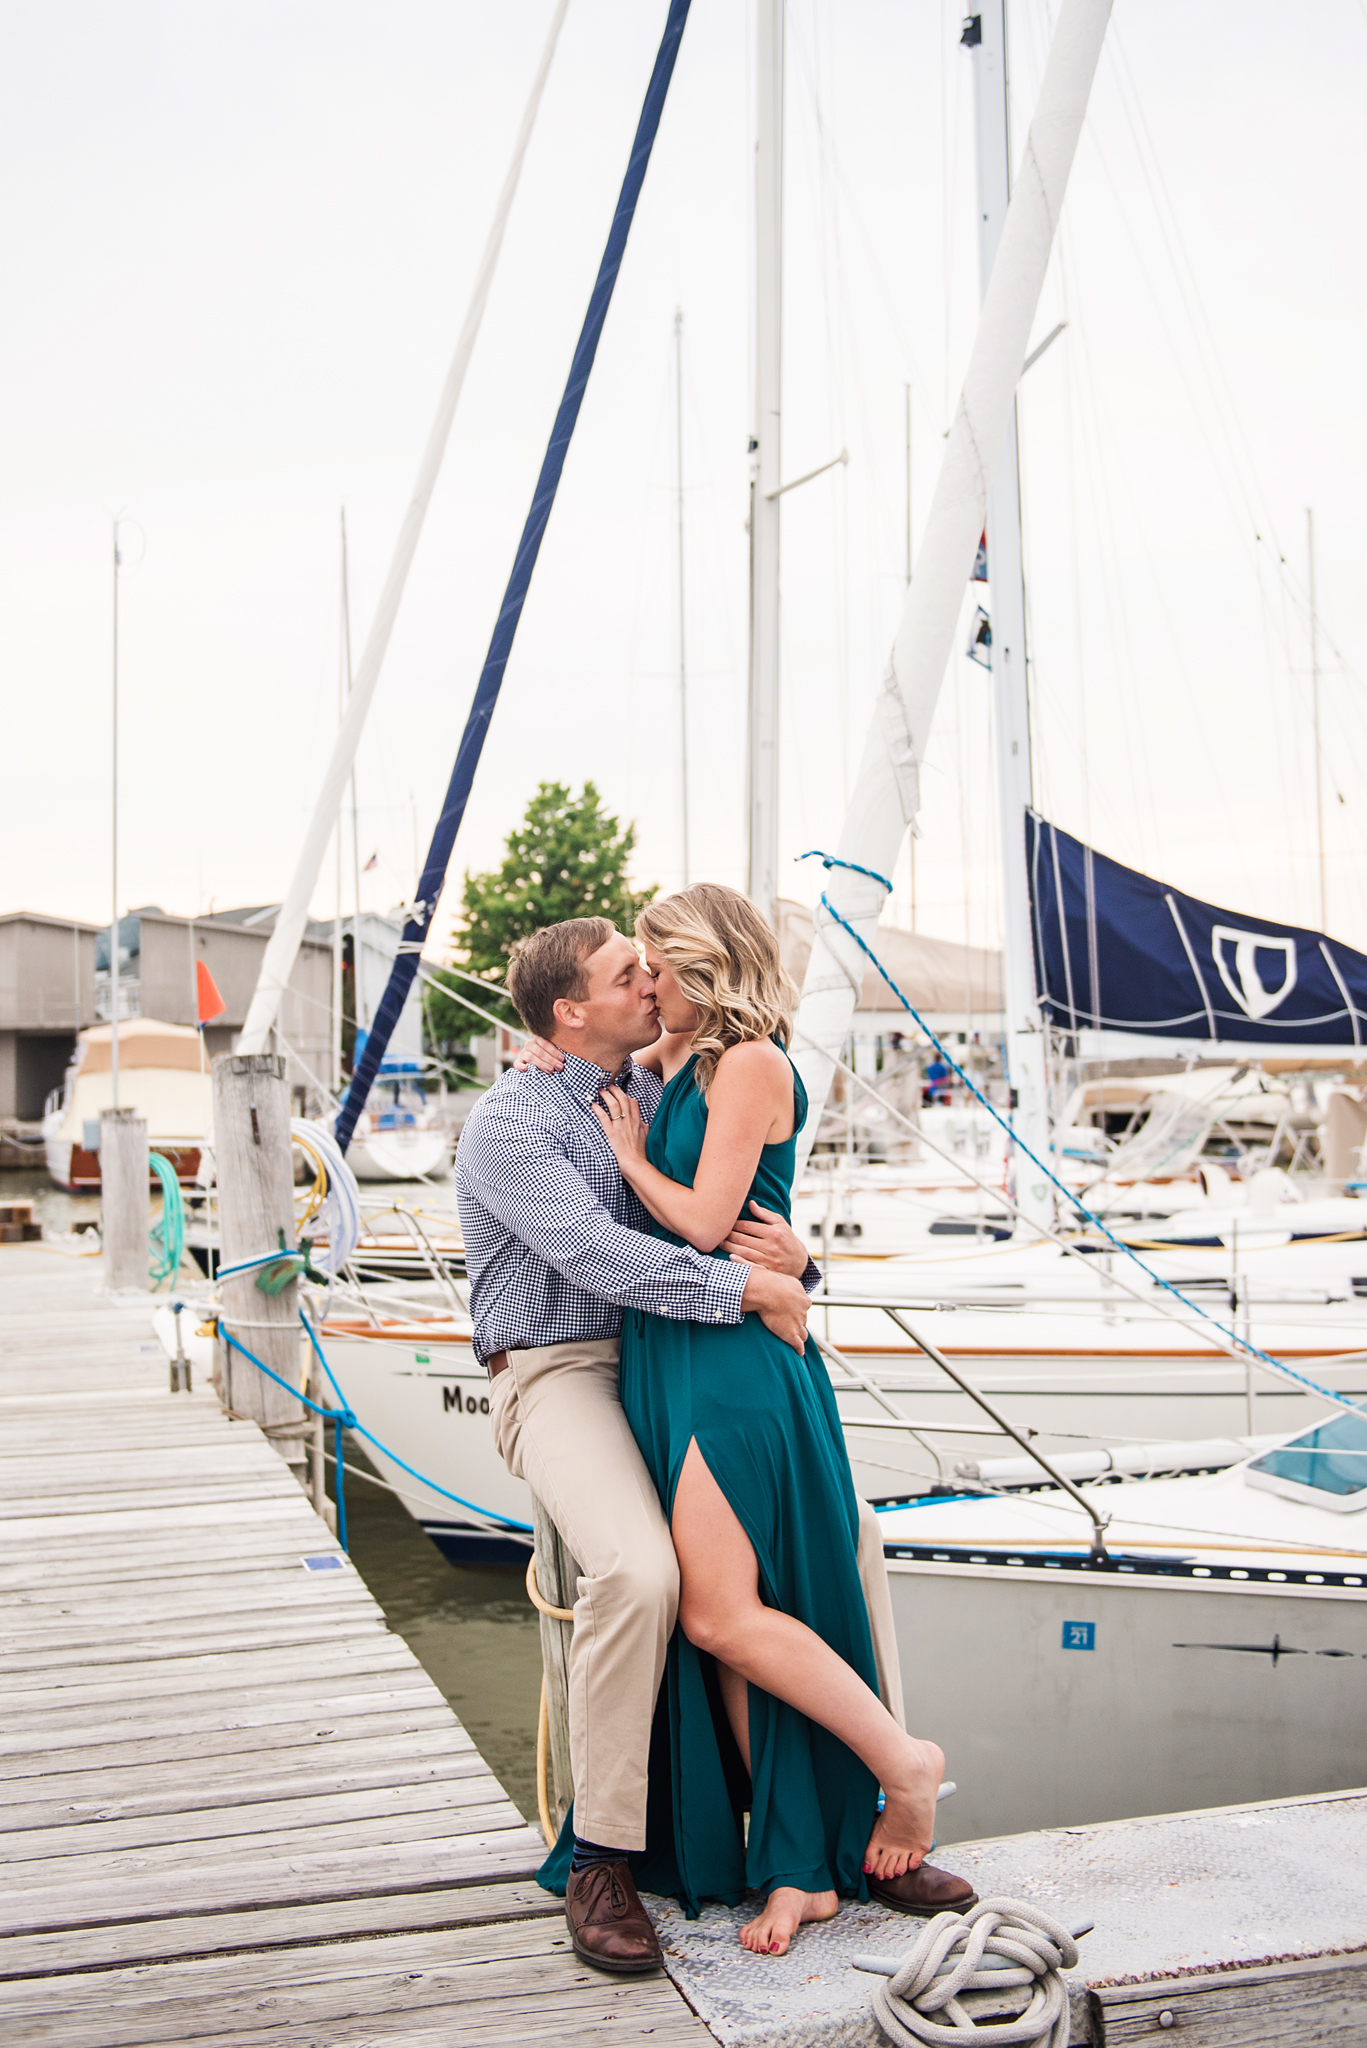 George_Eastman_House_Rochester_Yacht_Club_Rochester_Engagement_Session_JILL_STUDIO_Rochester_NY_Photographer_DSC_8206.jpg